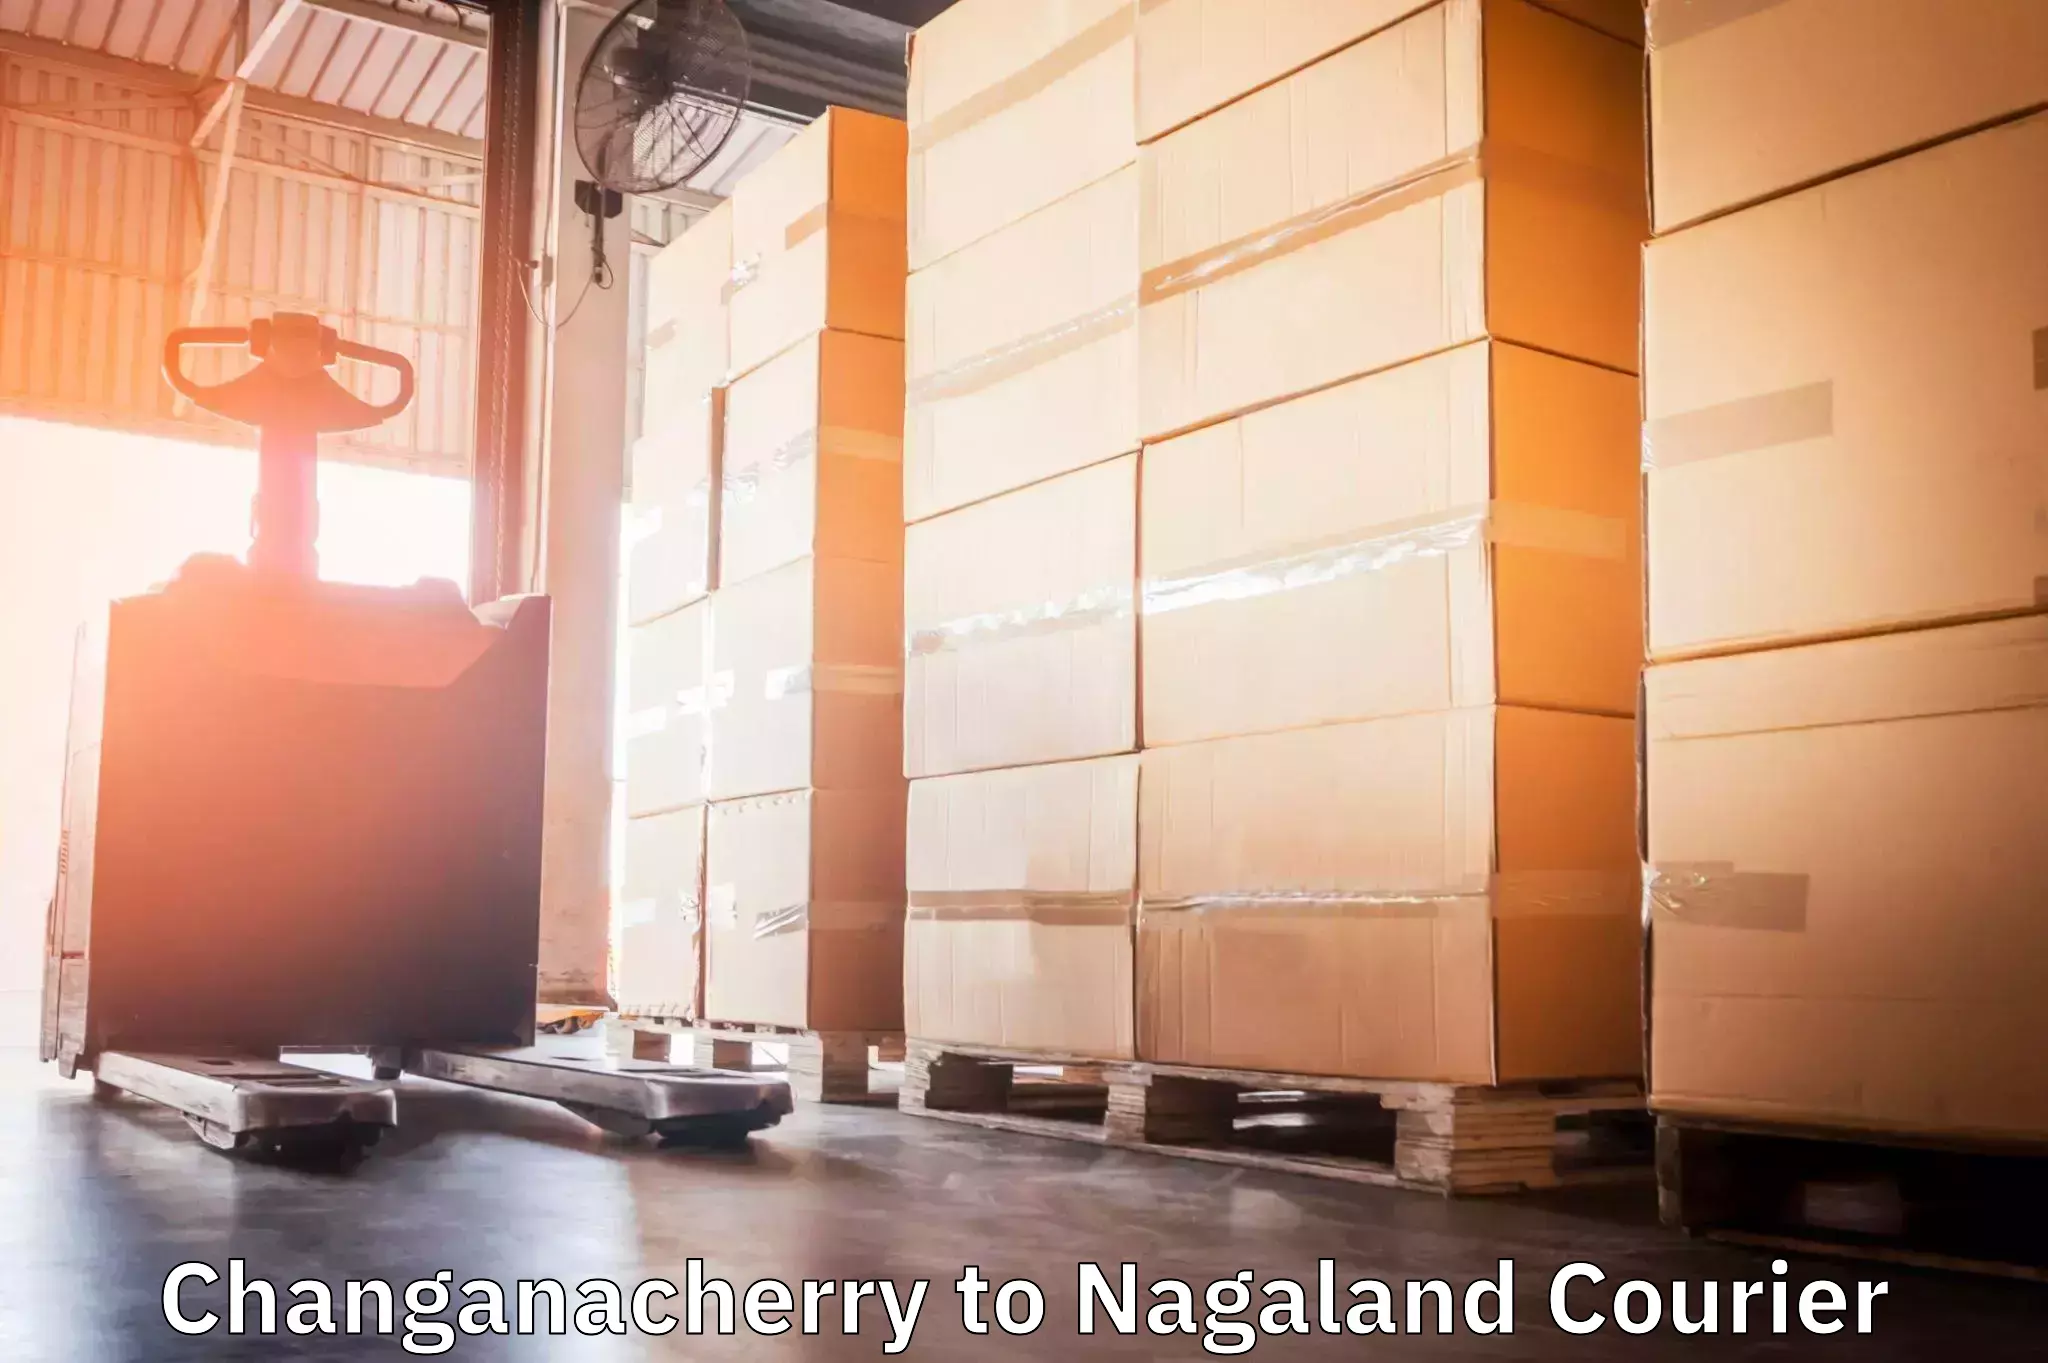 Professional courier handling Changanacherry to Nagaland